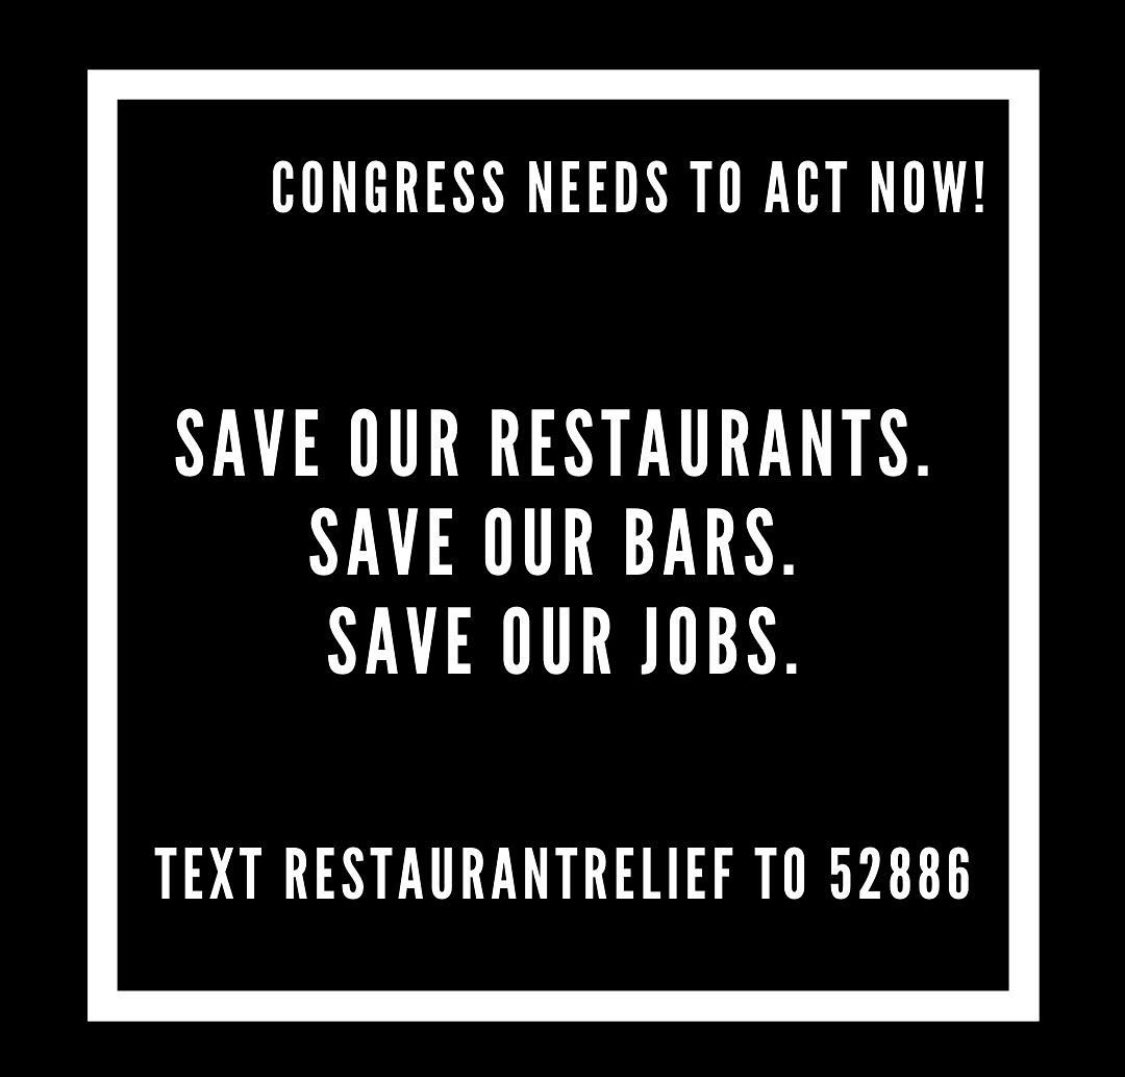 Independent restaurants won’t survive without support from congress. Text RESTAURANTRELIEF to 52886 now! #SaveOurRestaurants #SaveOurBars #SaveOurJobs